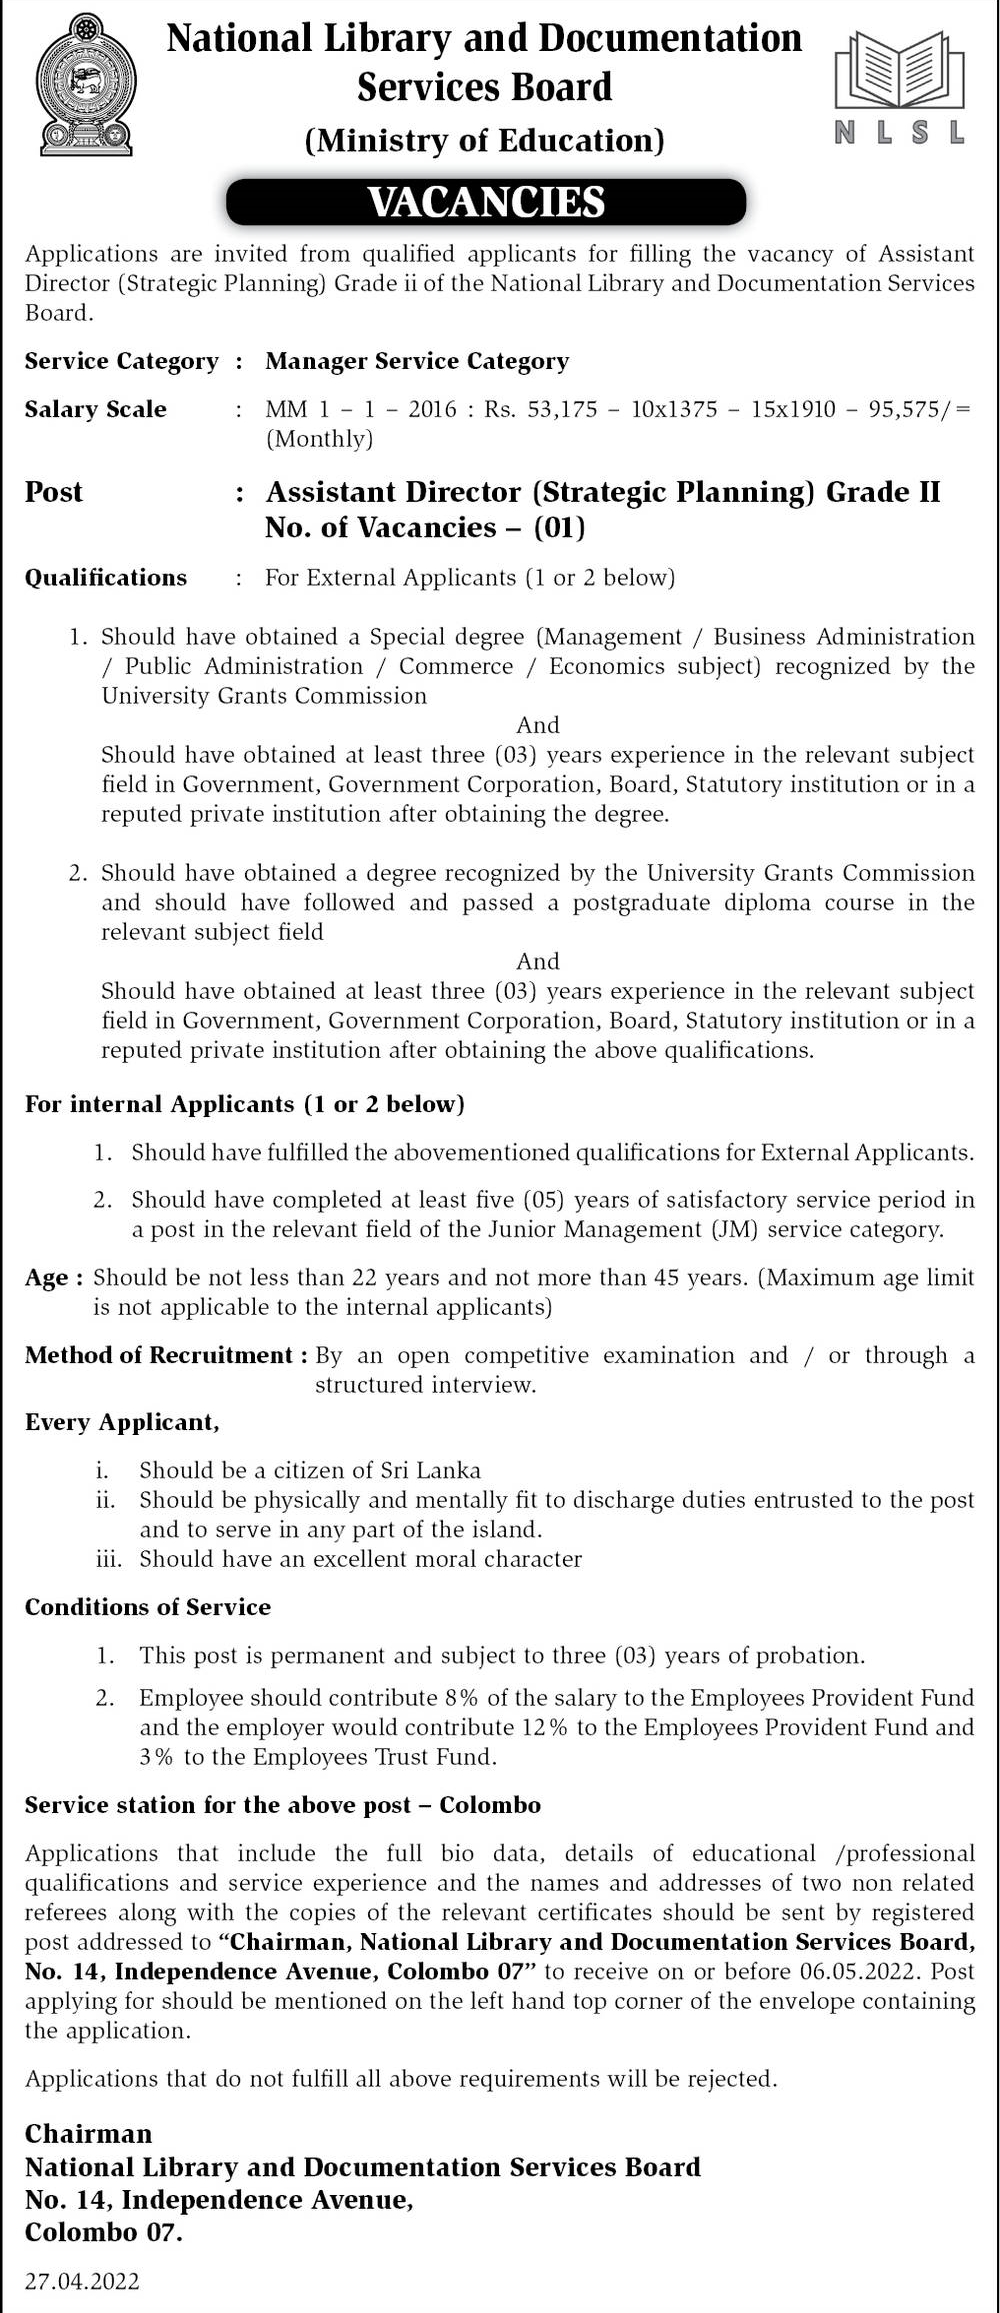 National Library and Documentation Services Board Vacancies in English